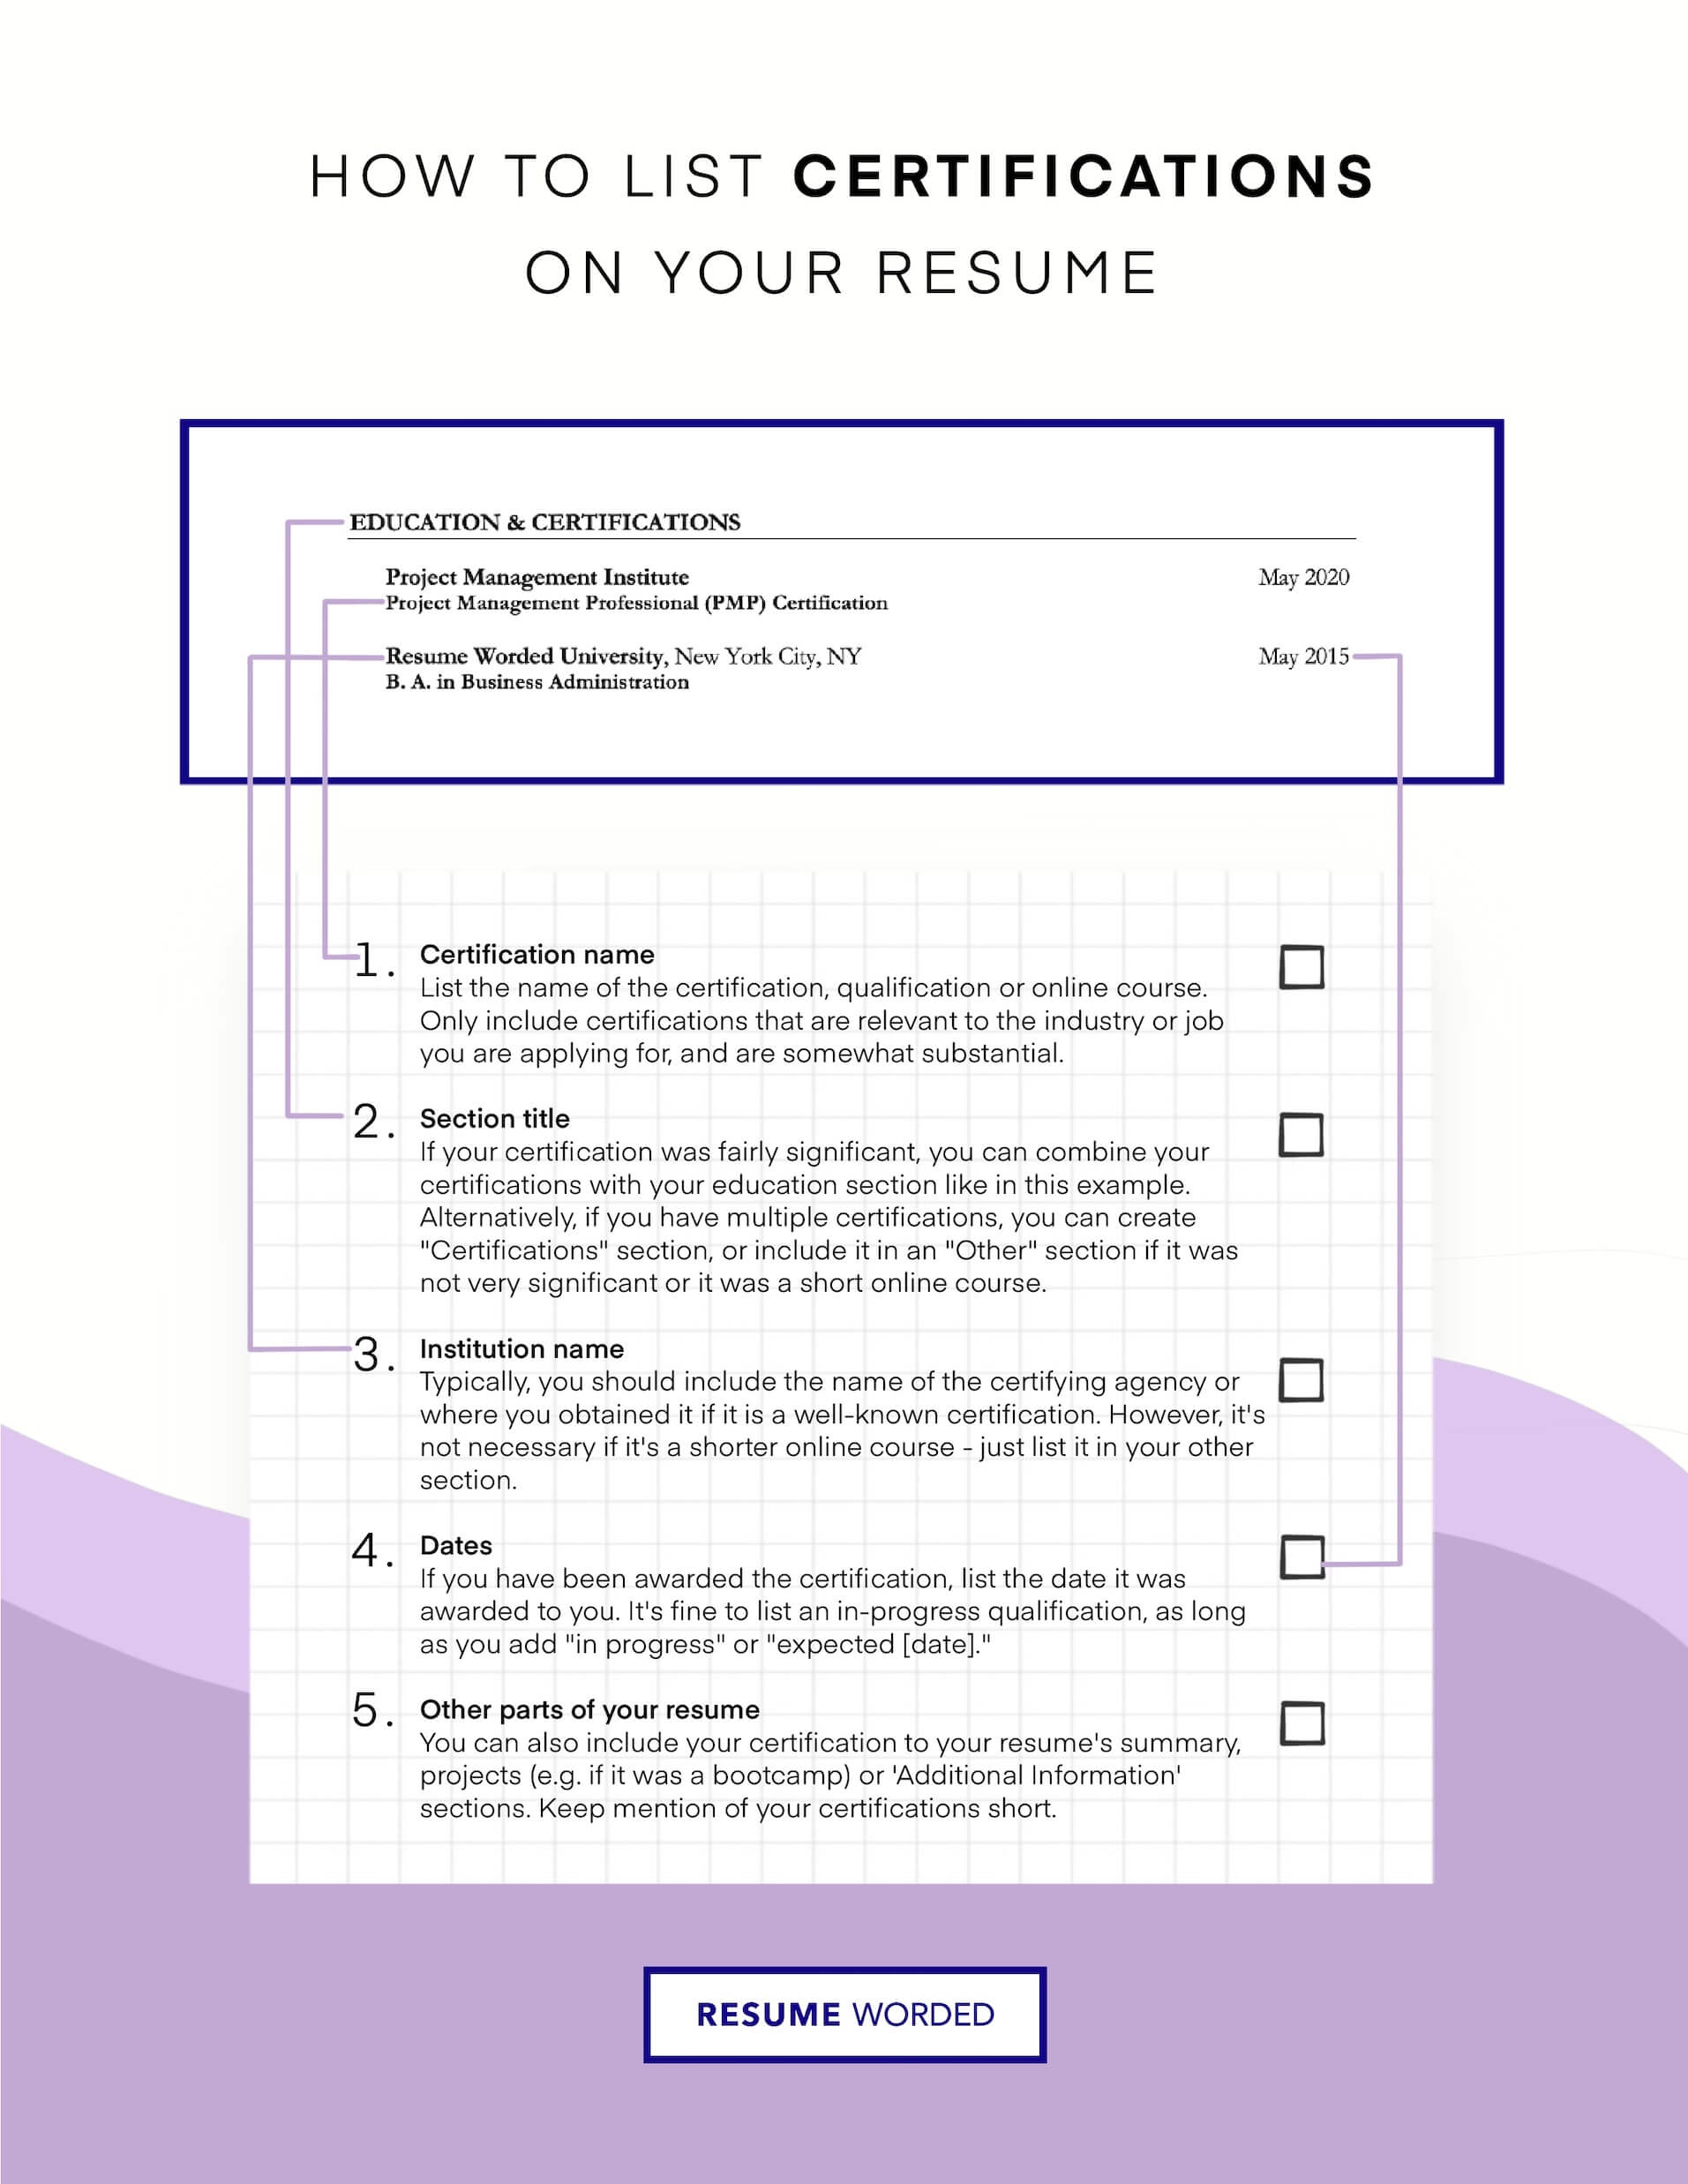 Ensure you are certified. - GCP Data Engineer Resume